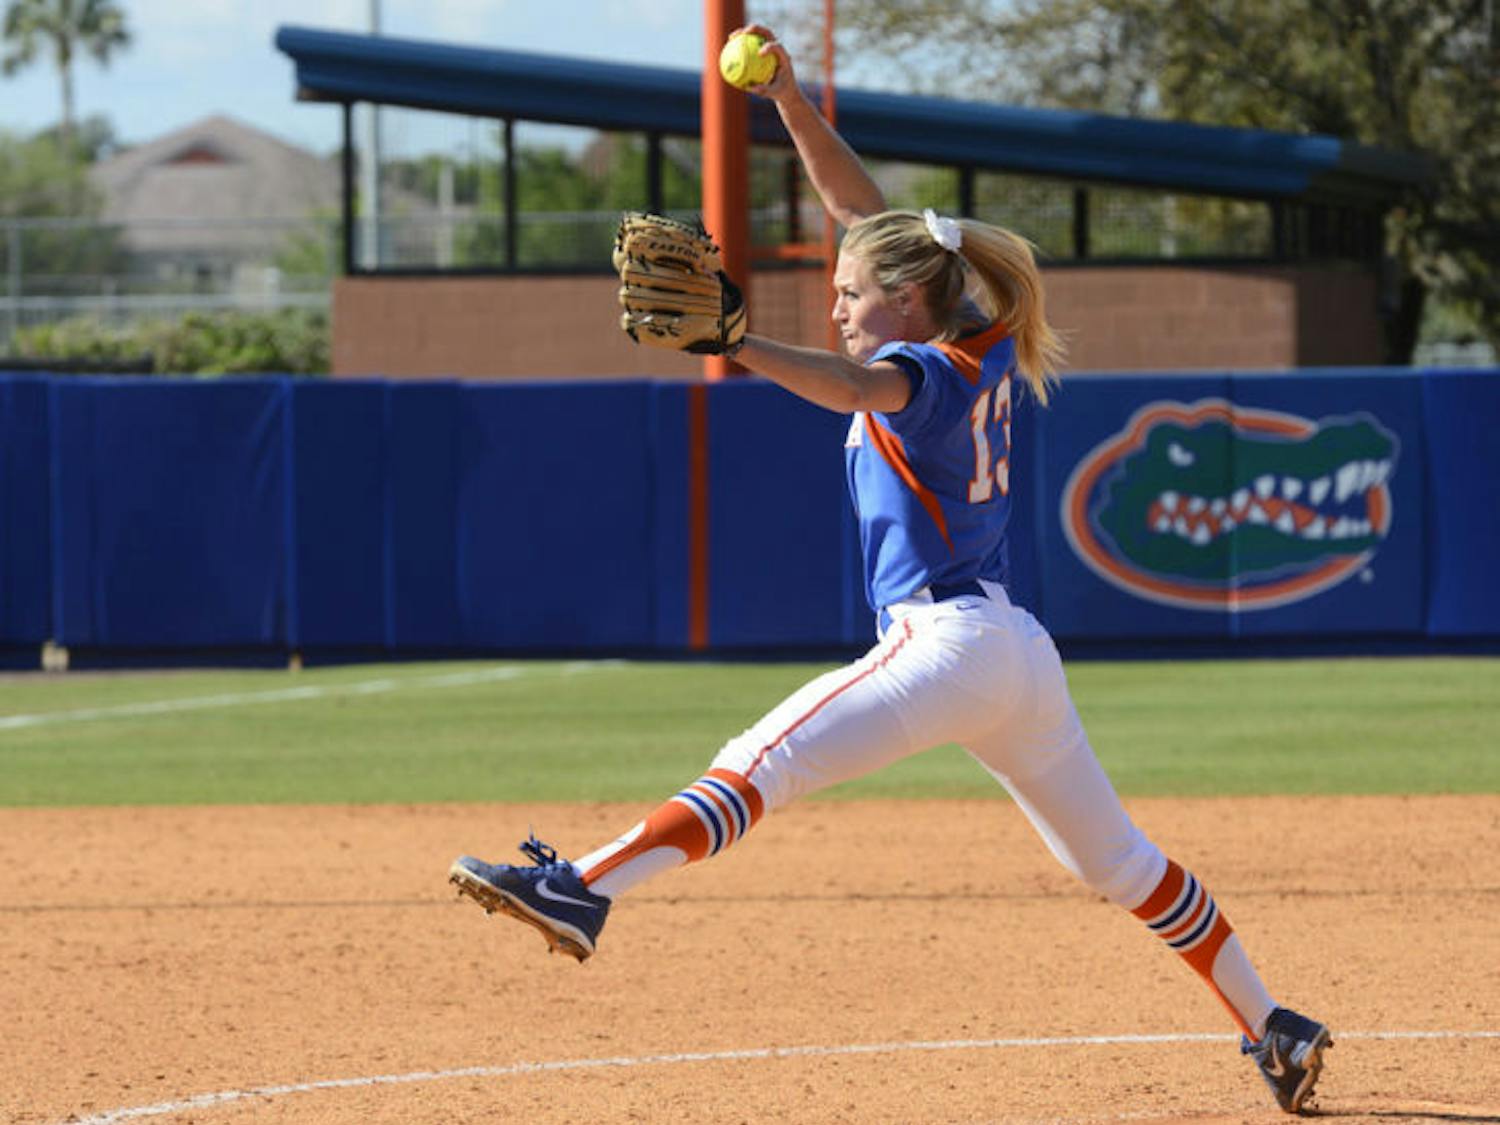 Hannah Rogers pitches during Florida’s 4-2 win against Mississippi State on April 6, 2013. Rogers holds a team-best 1.81 ERA, which is the fourth-best mark in the Southeastern Conference this season.